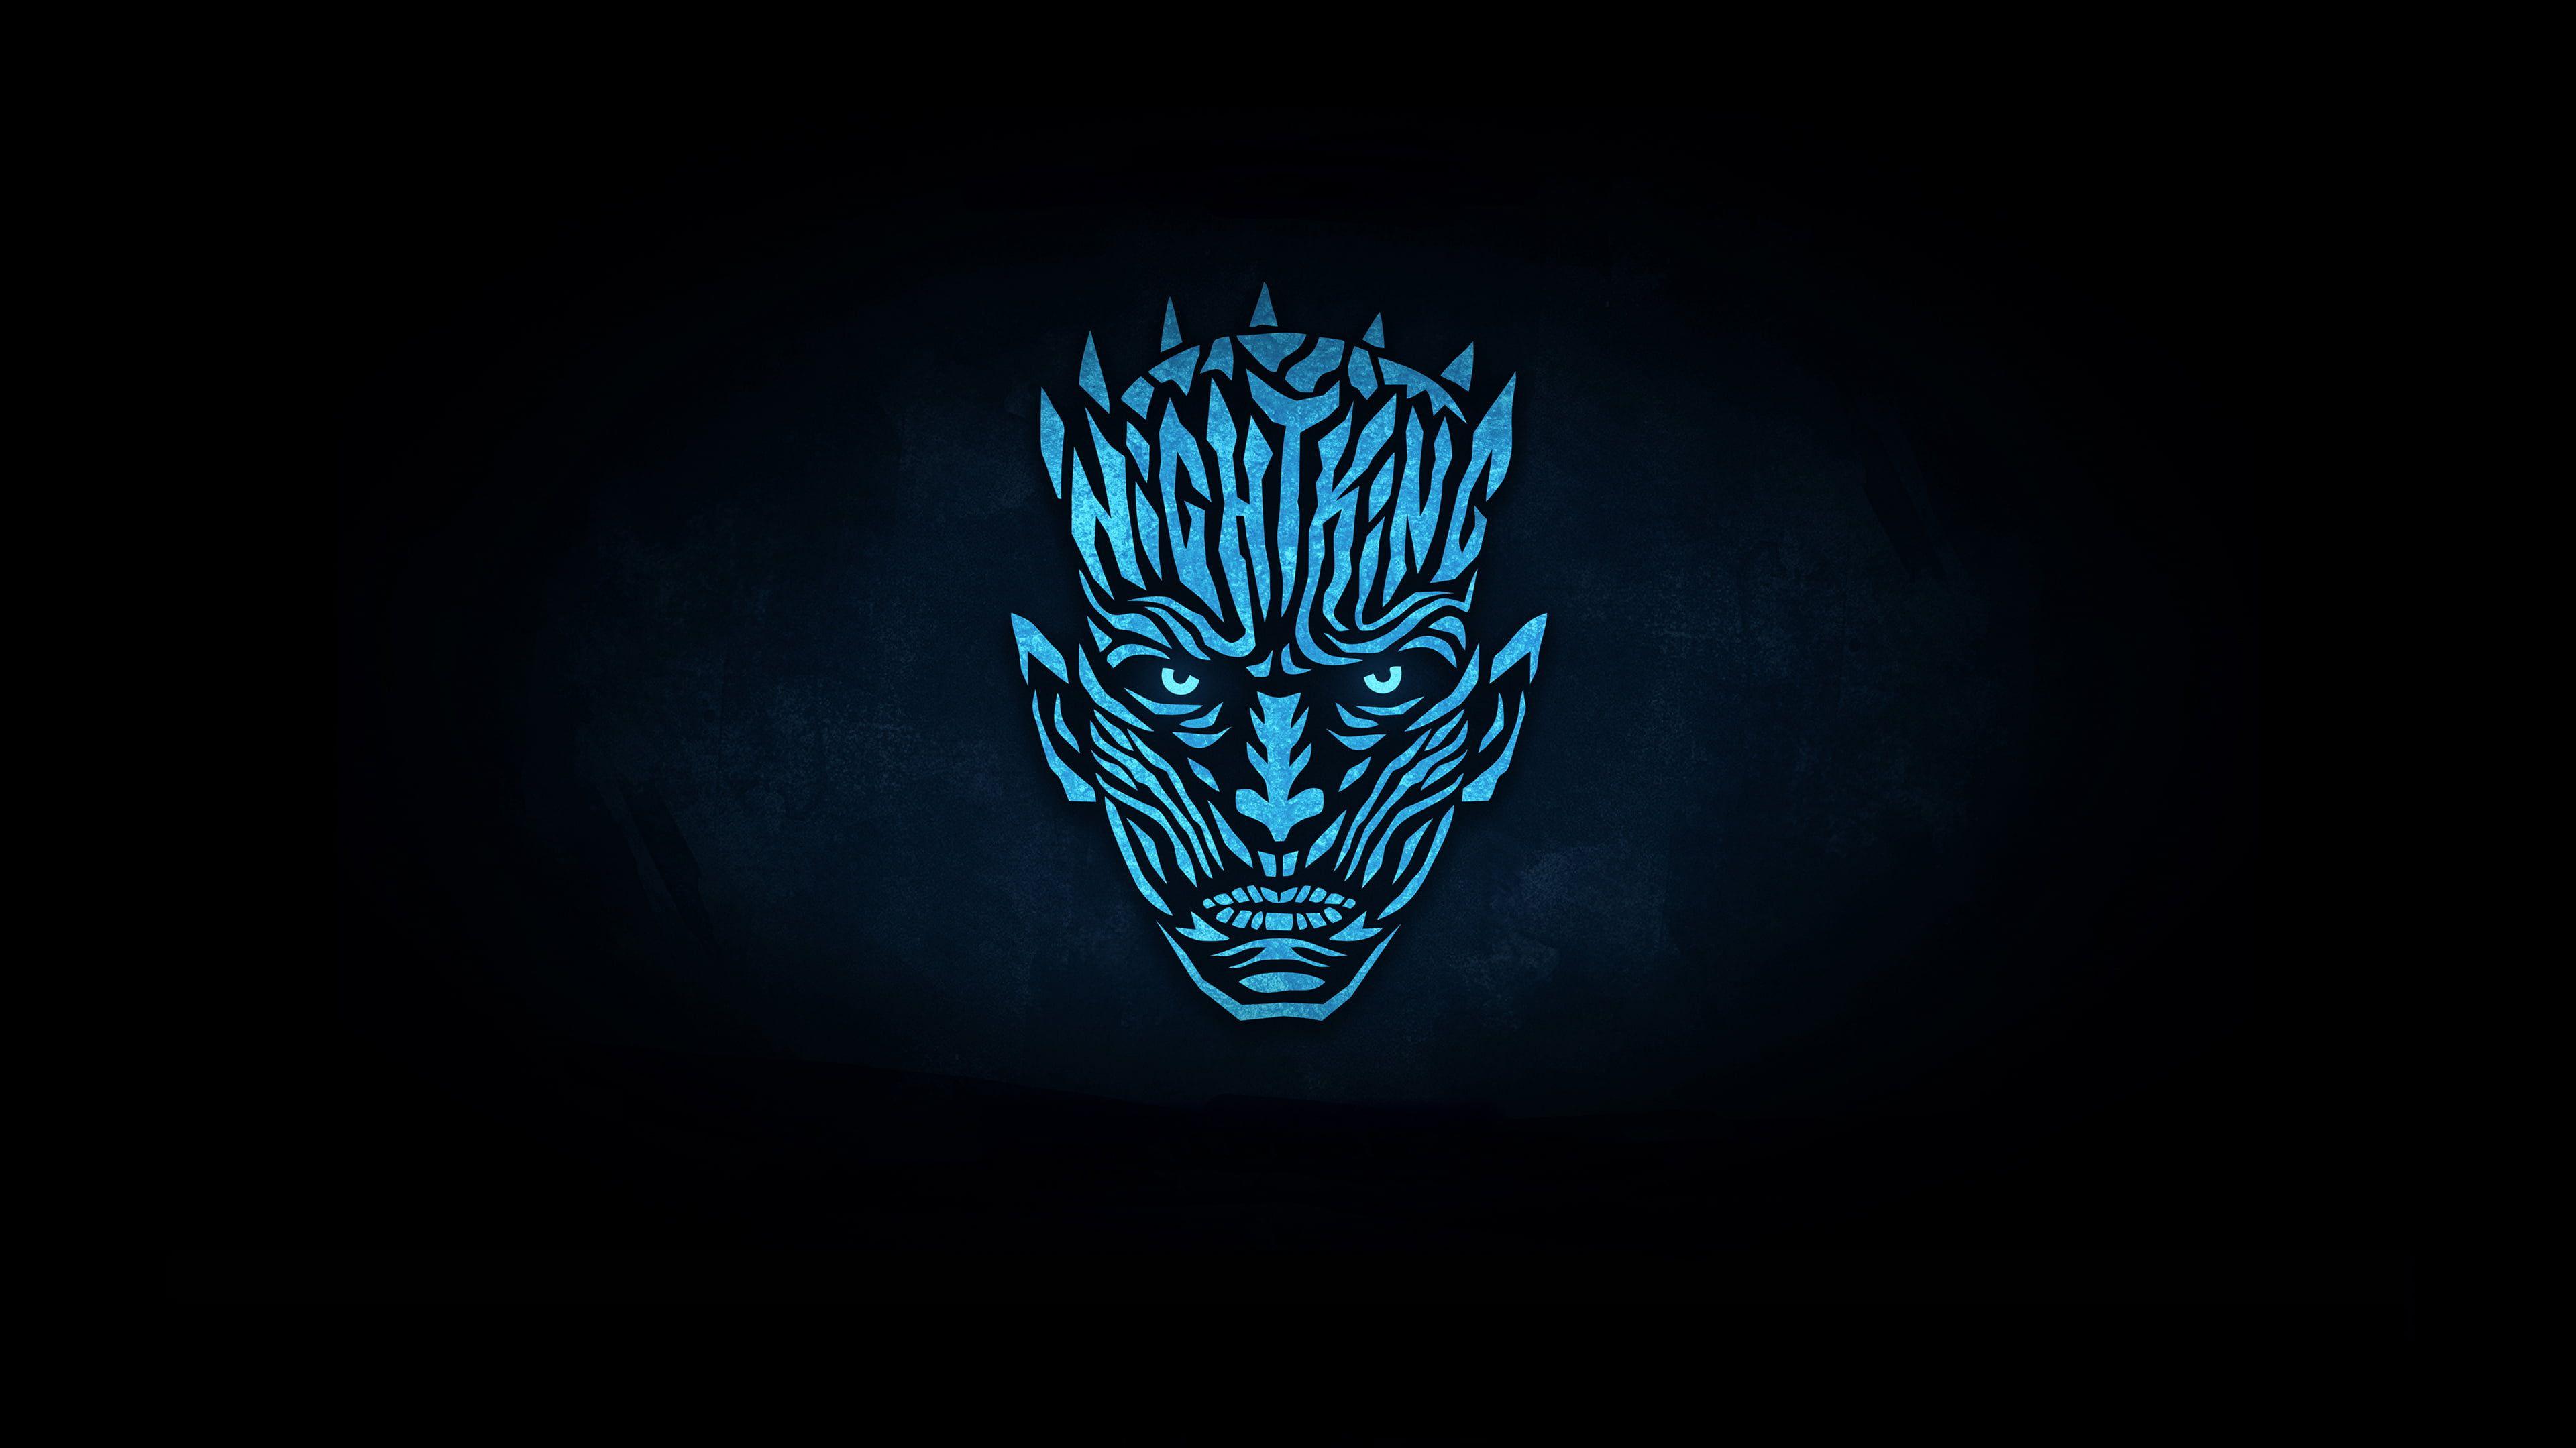 TV Show Game Of Thrones Minimalist Night King Game of Thrones